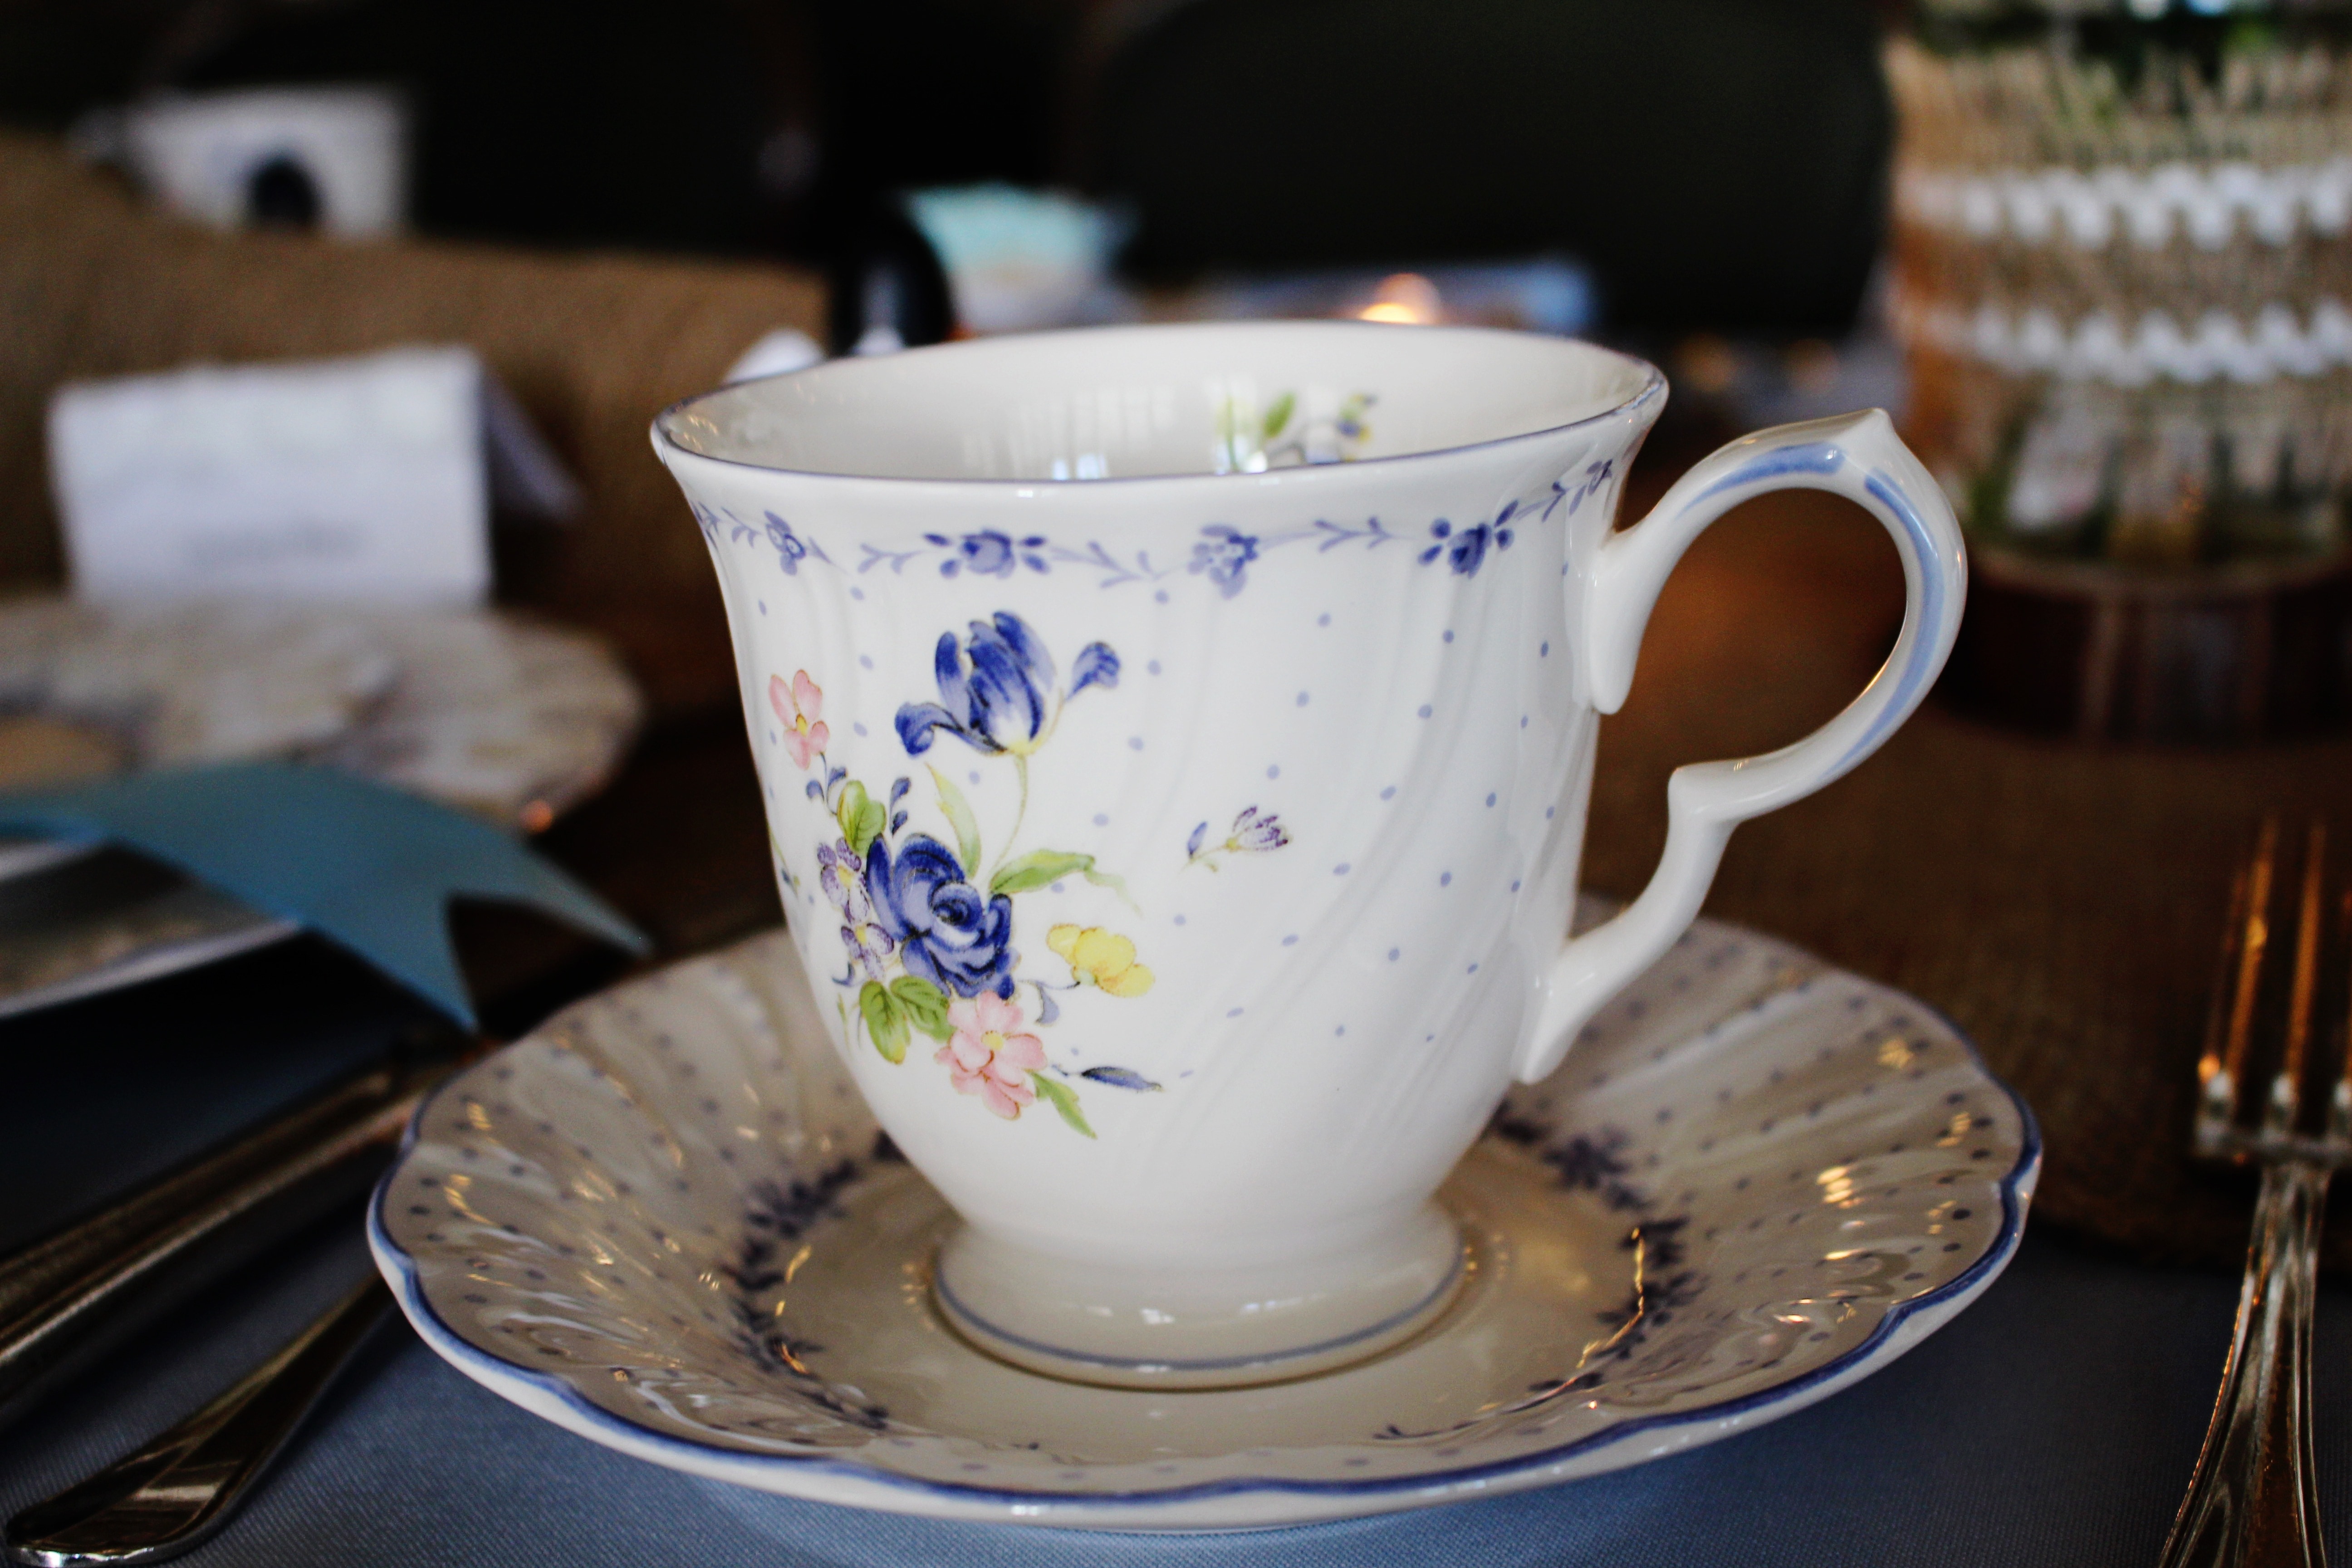 white blue and green floral print ceramic teacup and dish set